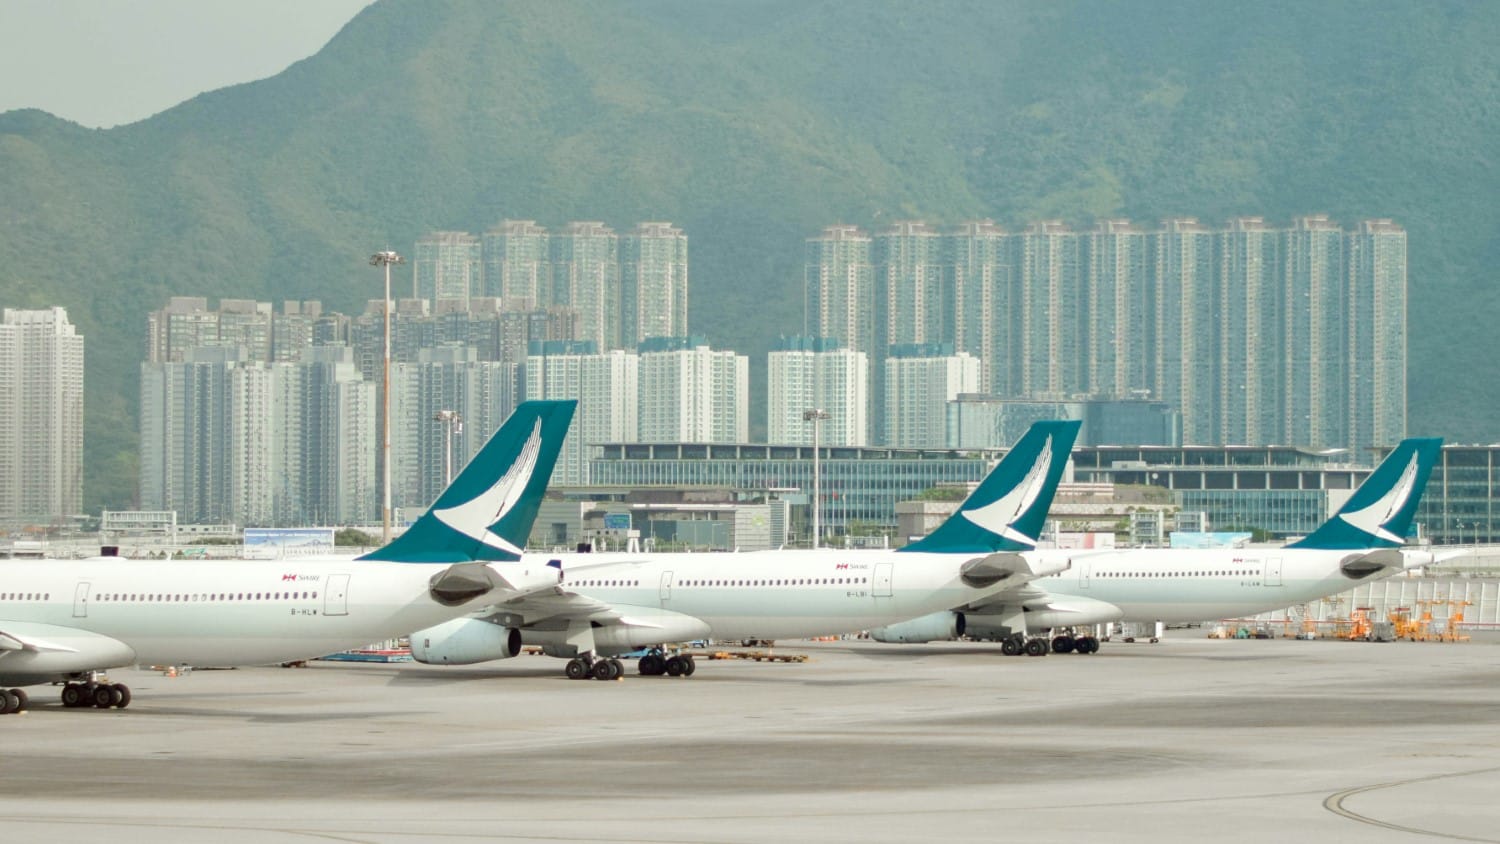 cathay pacific airplanes on tarmac